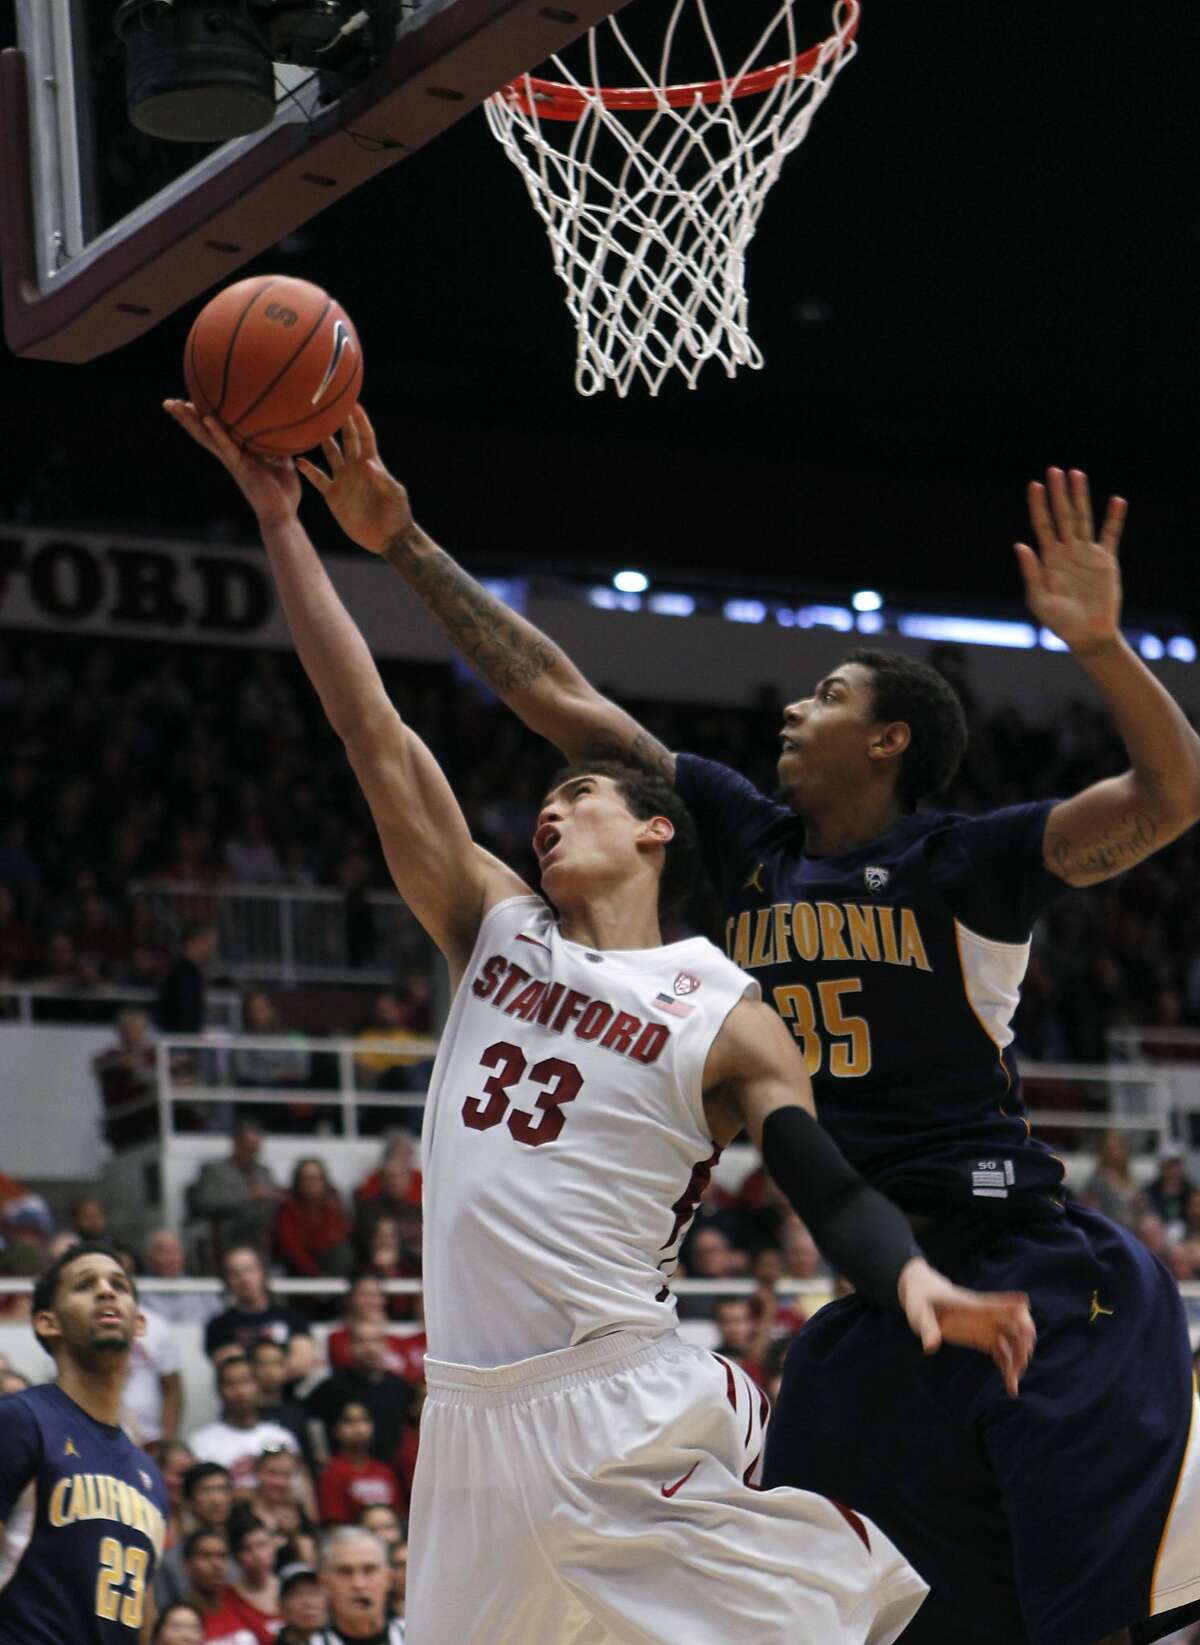 Cal's Richard Solomon (35) denies Stanford's Dwight Powell of a basket in the second half of Stanford's 69-59 win over Cal at Maples Pavilion in Stanford, Calif. on Saturday, Jan. 19, 2013.